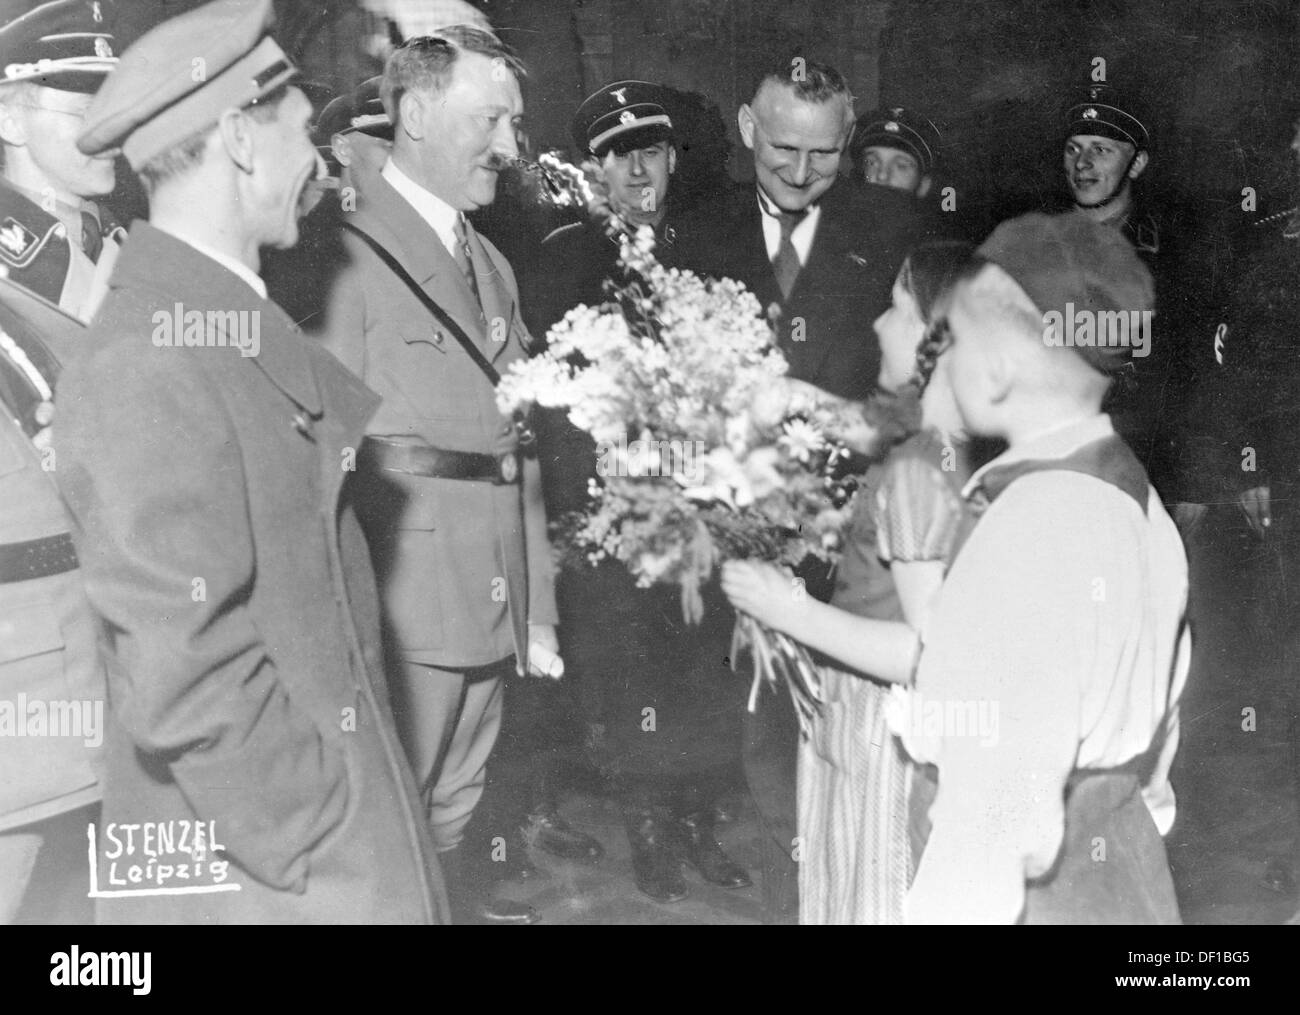 The image from the Nazi Propaganda! shows Adolf Hitler being welcomed by mayor Carl Friedrich Goerdeler (r, in suite) in the Neue Rathaus in Leipzig, Germany, in 1934. To the left, Reich Minister for Propaganda! Joseph Goebbels. Fotoarchiv für Zeitgeschichte Stock Photo